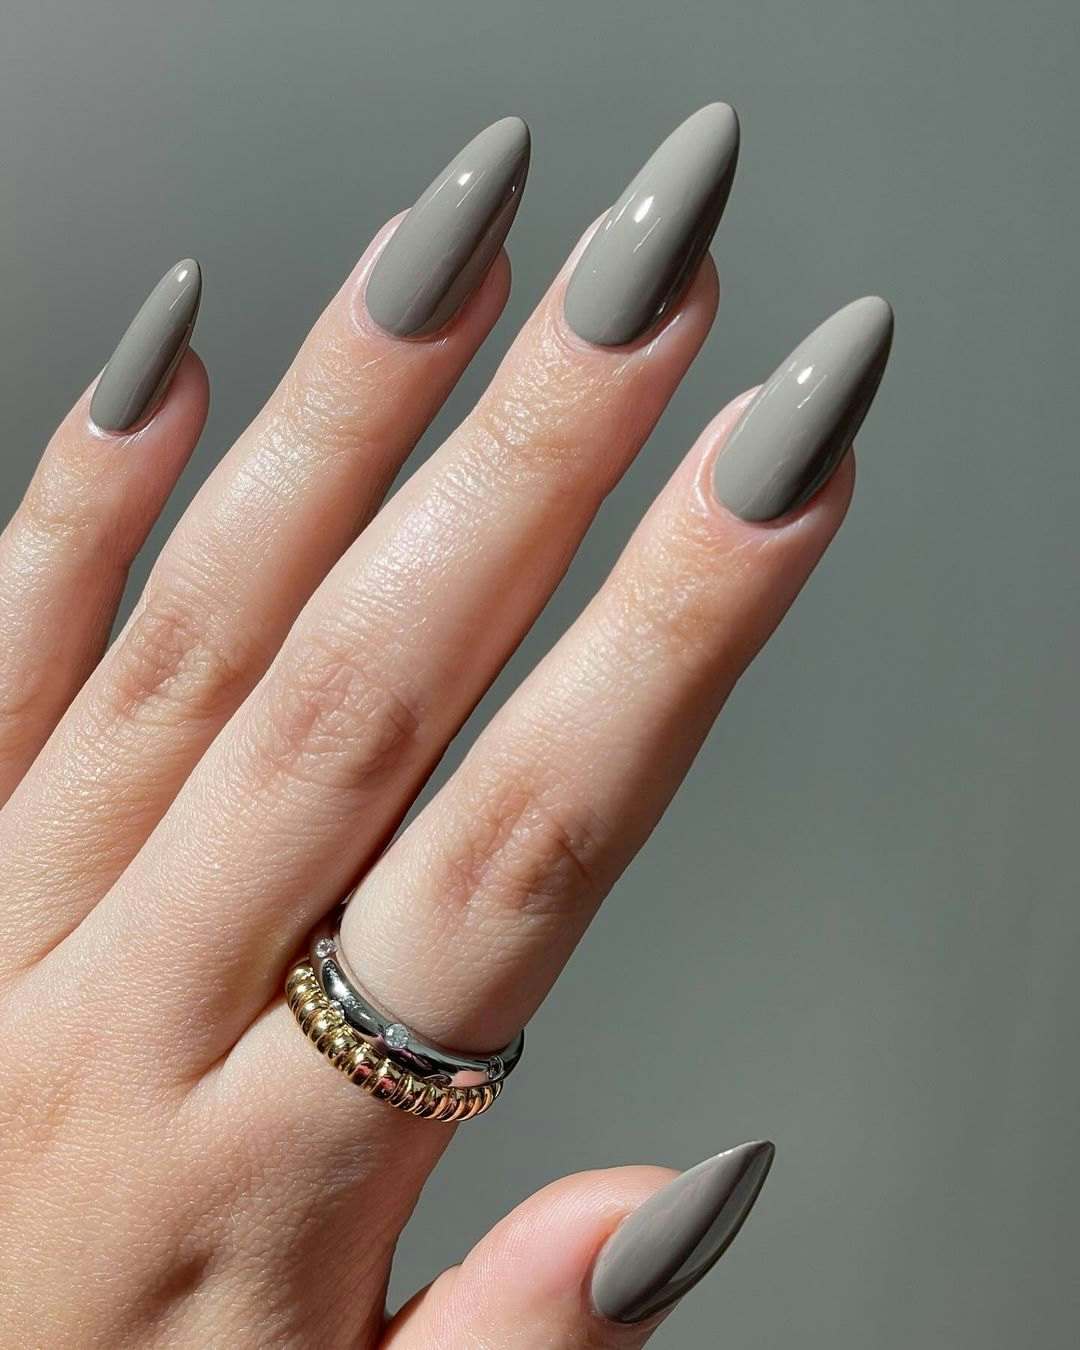 Buy P.O.P Gargoyle Fall Cream Collection Charcoal Grey Dark Light Black  Pastel Nail Polish Lacquer Varnish Indie Water Marble Stamping Online in  India - Etsy